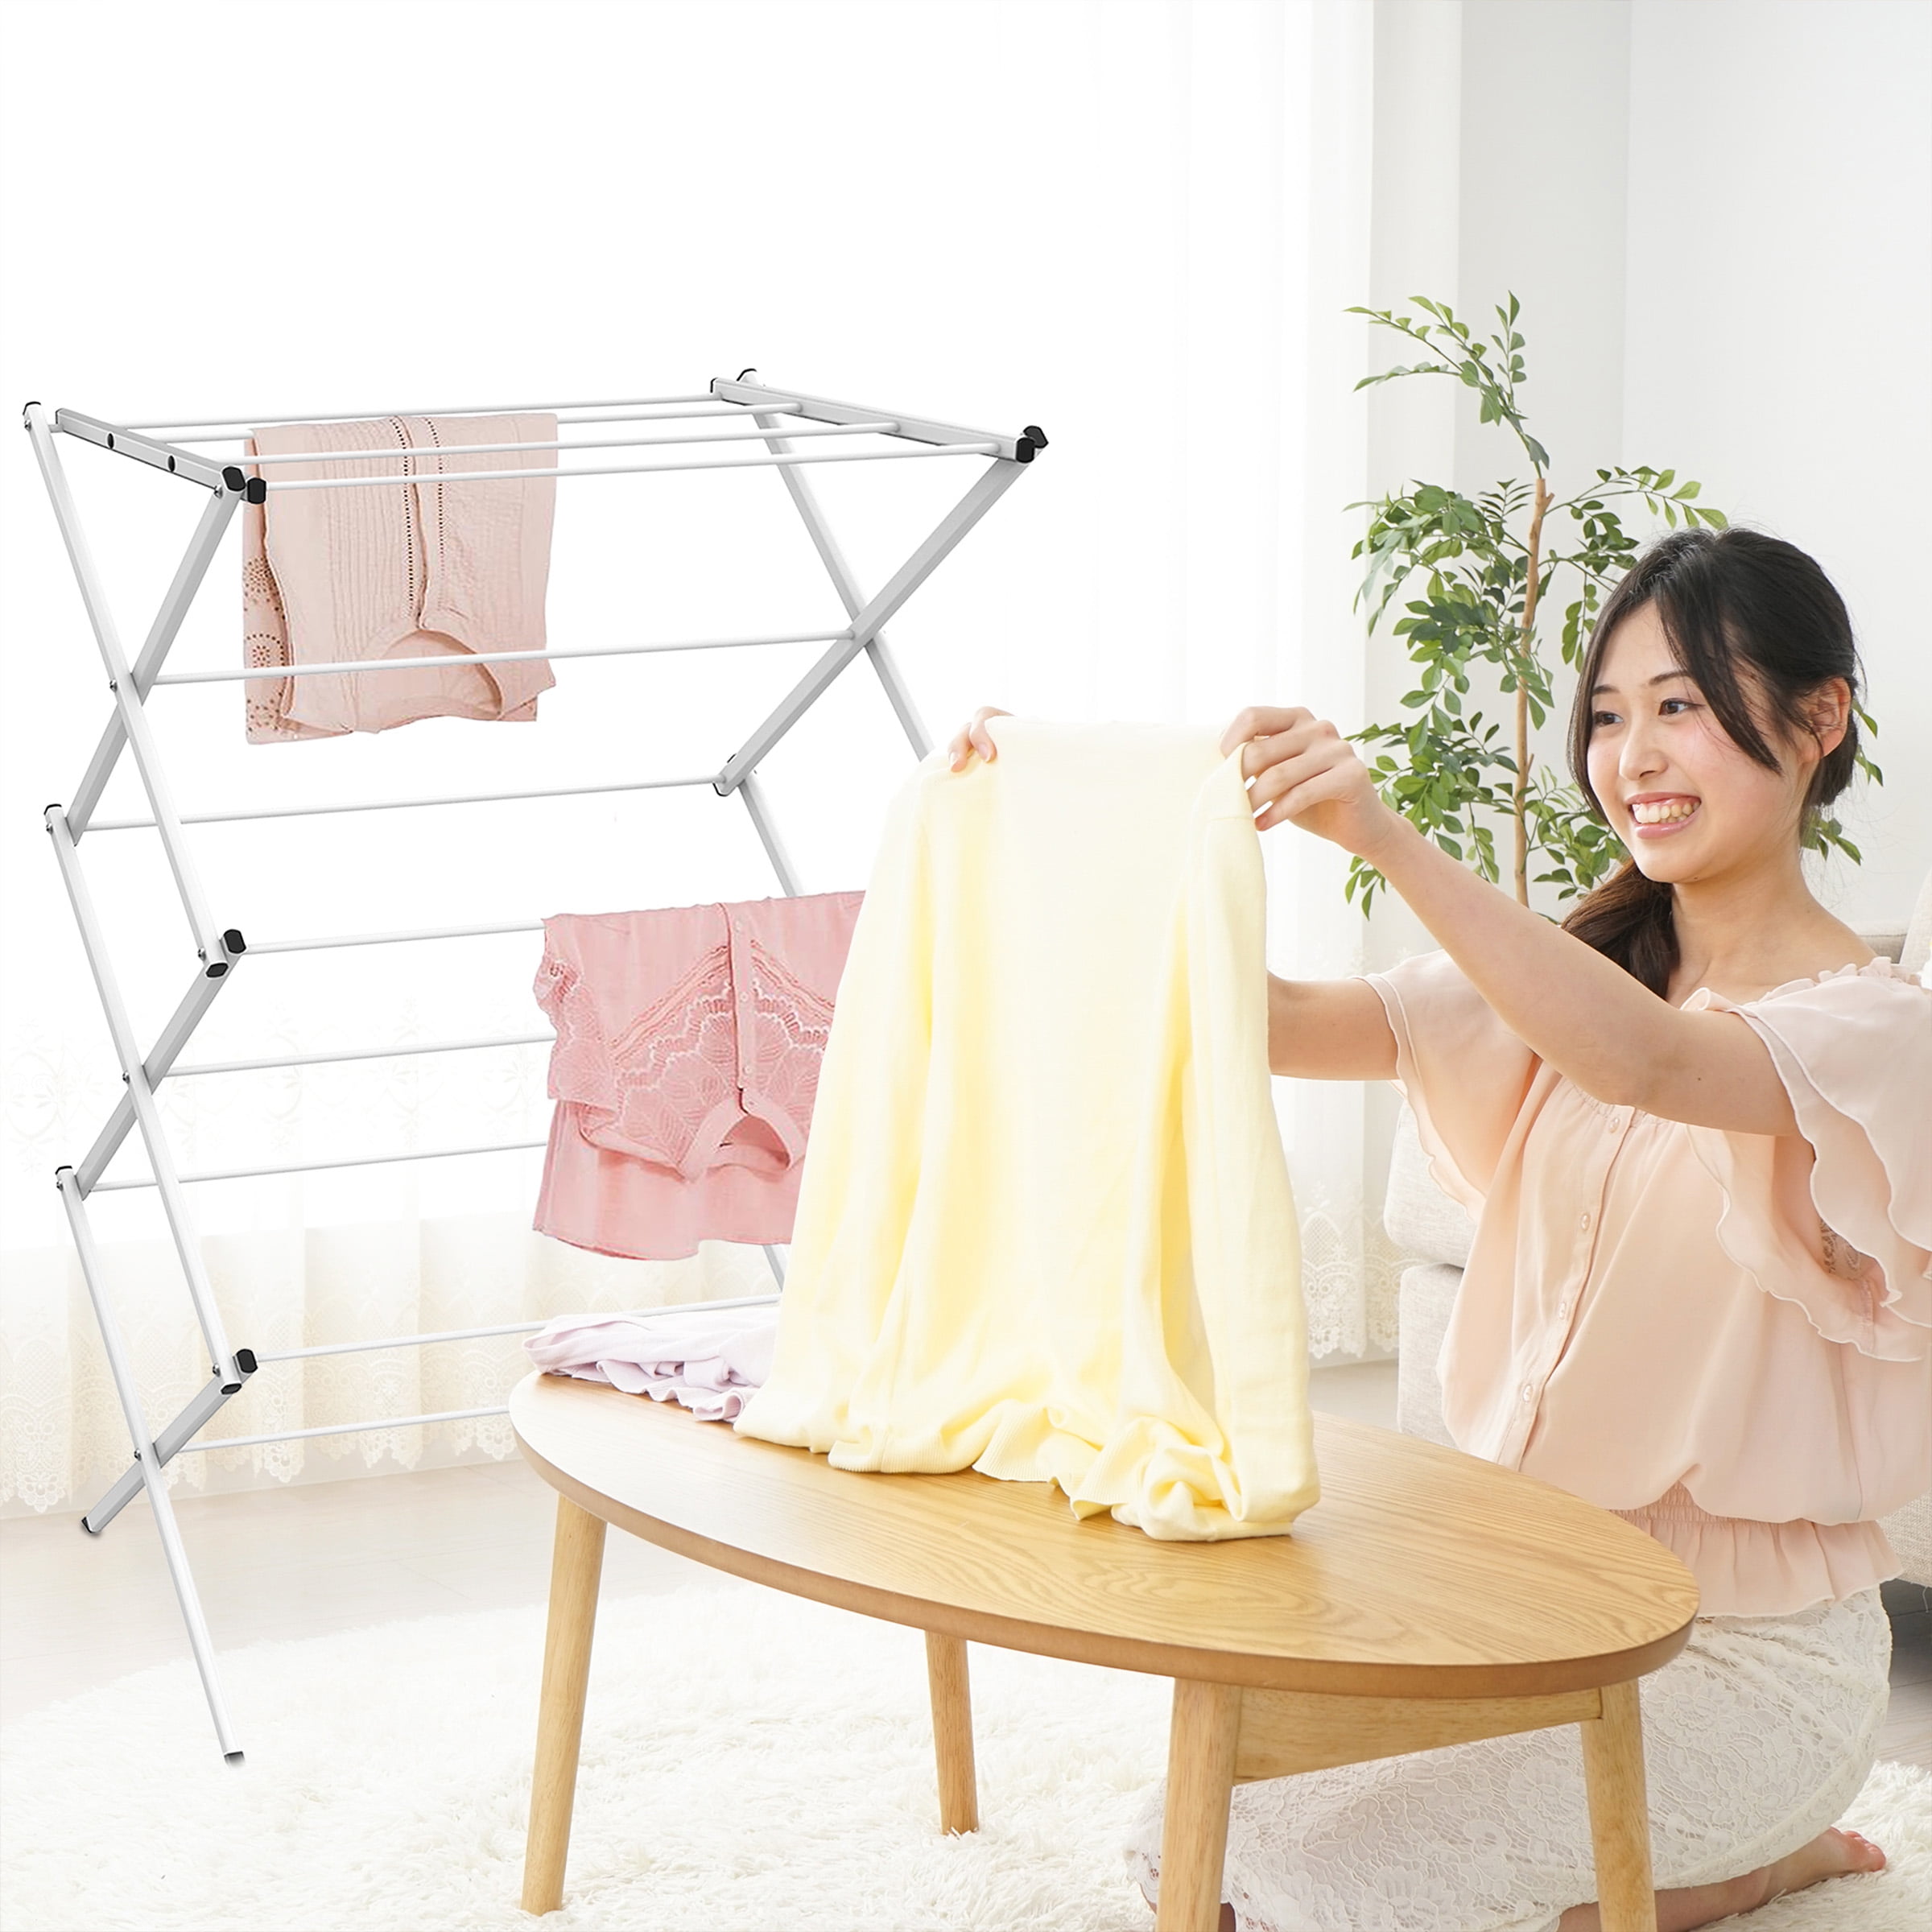 Clothes Drying Rack-24ft. of Drying Space-Collapsible and Compact for  Indoor/Outdoor Use By Lavish Home 